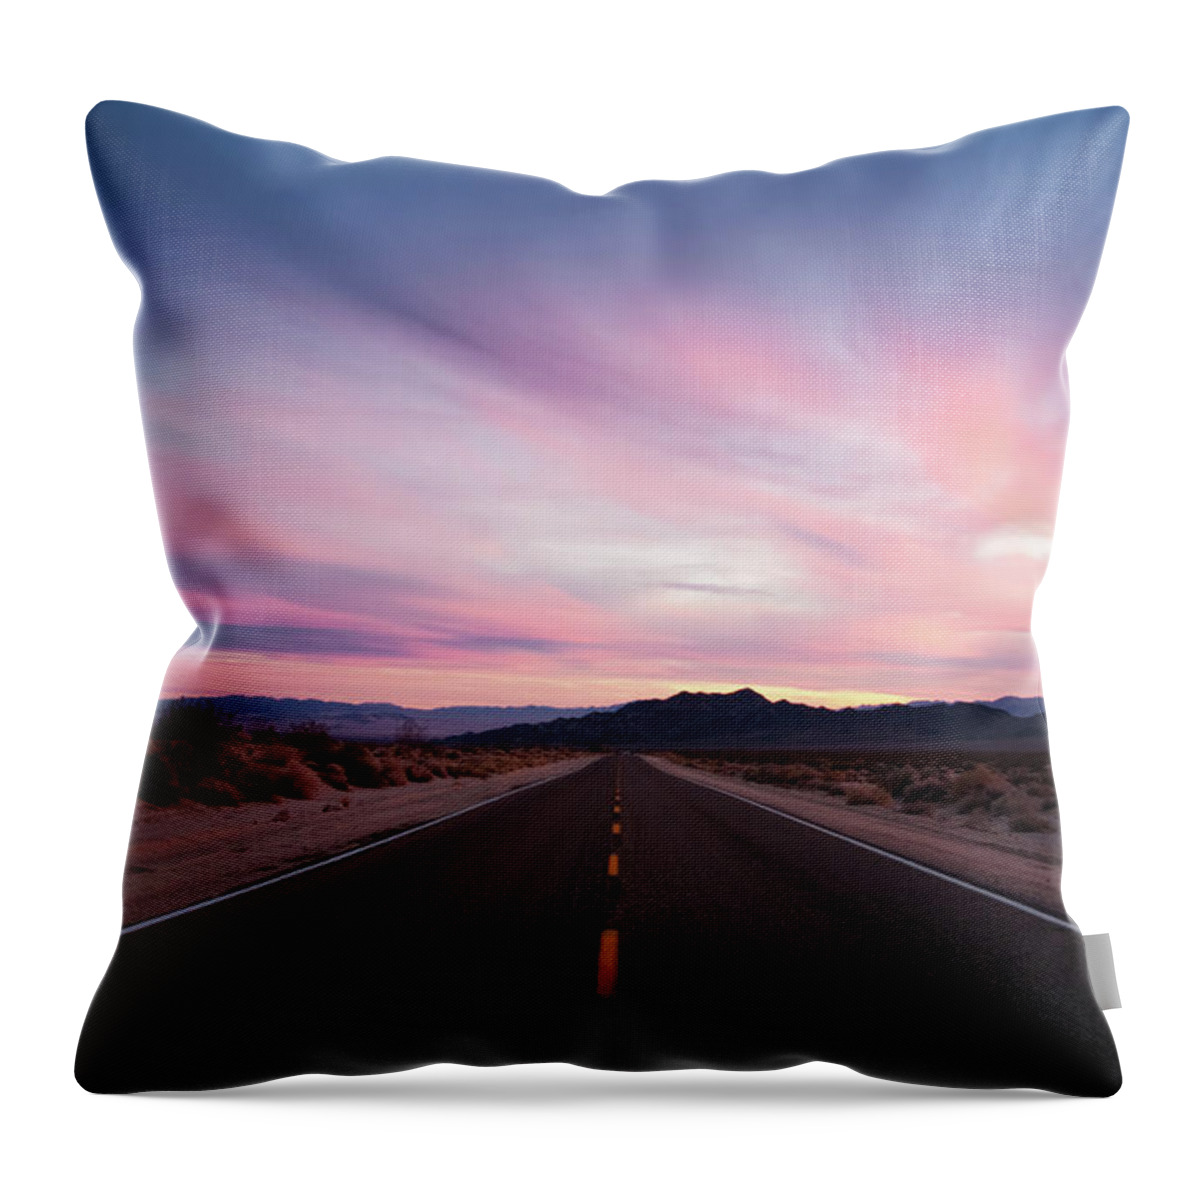 Grass Throw Pillow featuring the photograph Mojave Desert Sunset On Lonely, Wide by Eric Lowenbach